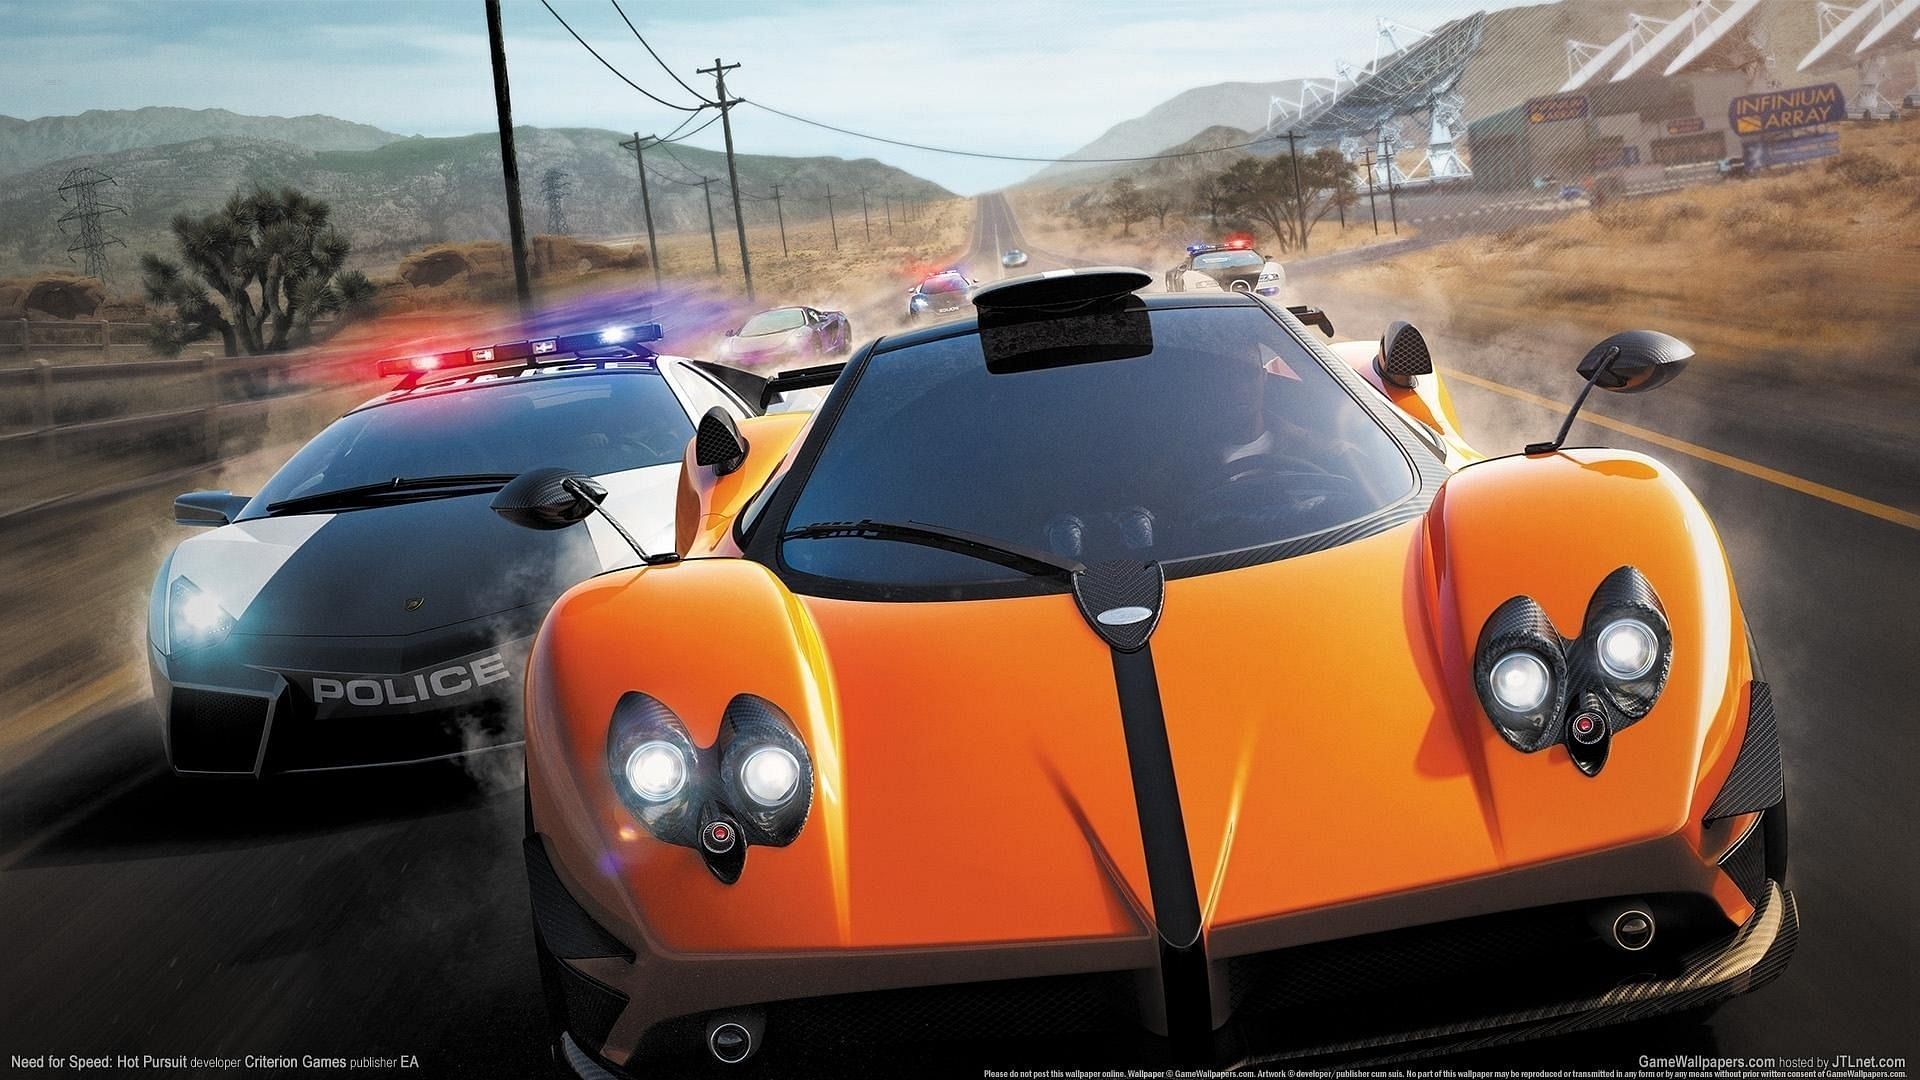 Escape from the police, drive across countries and be unstoppable (Image via DICE)